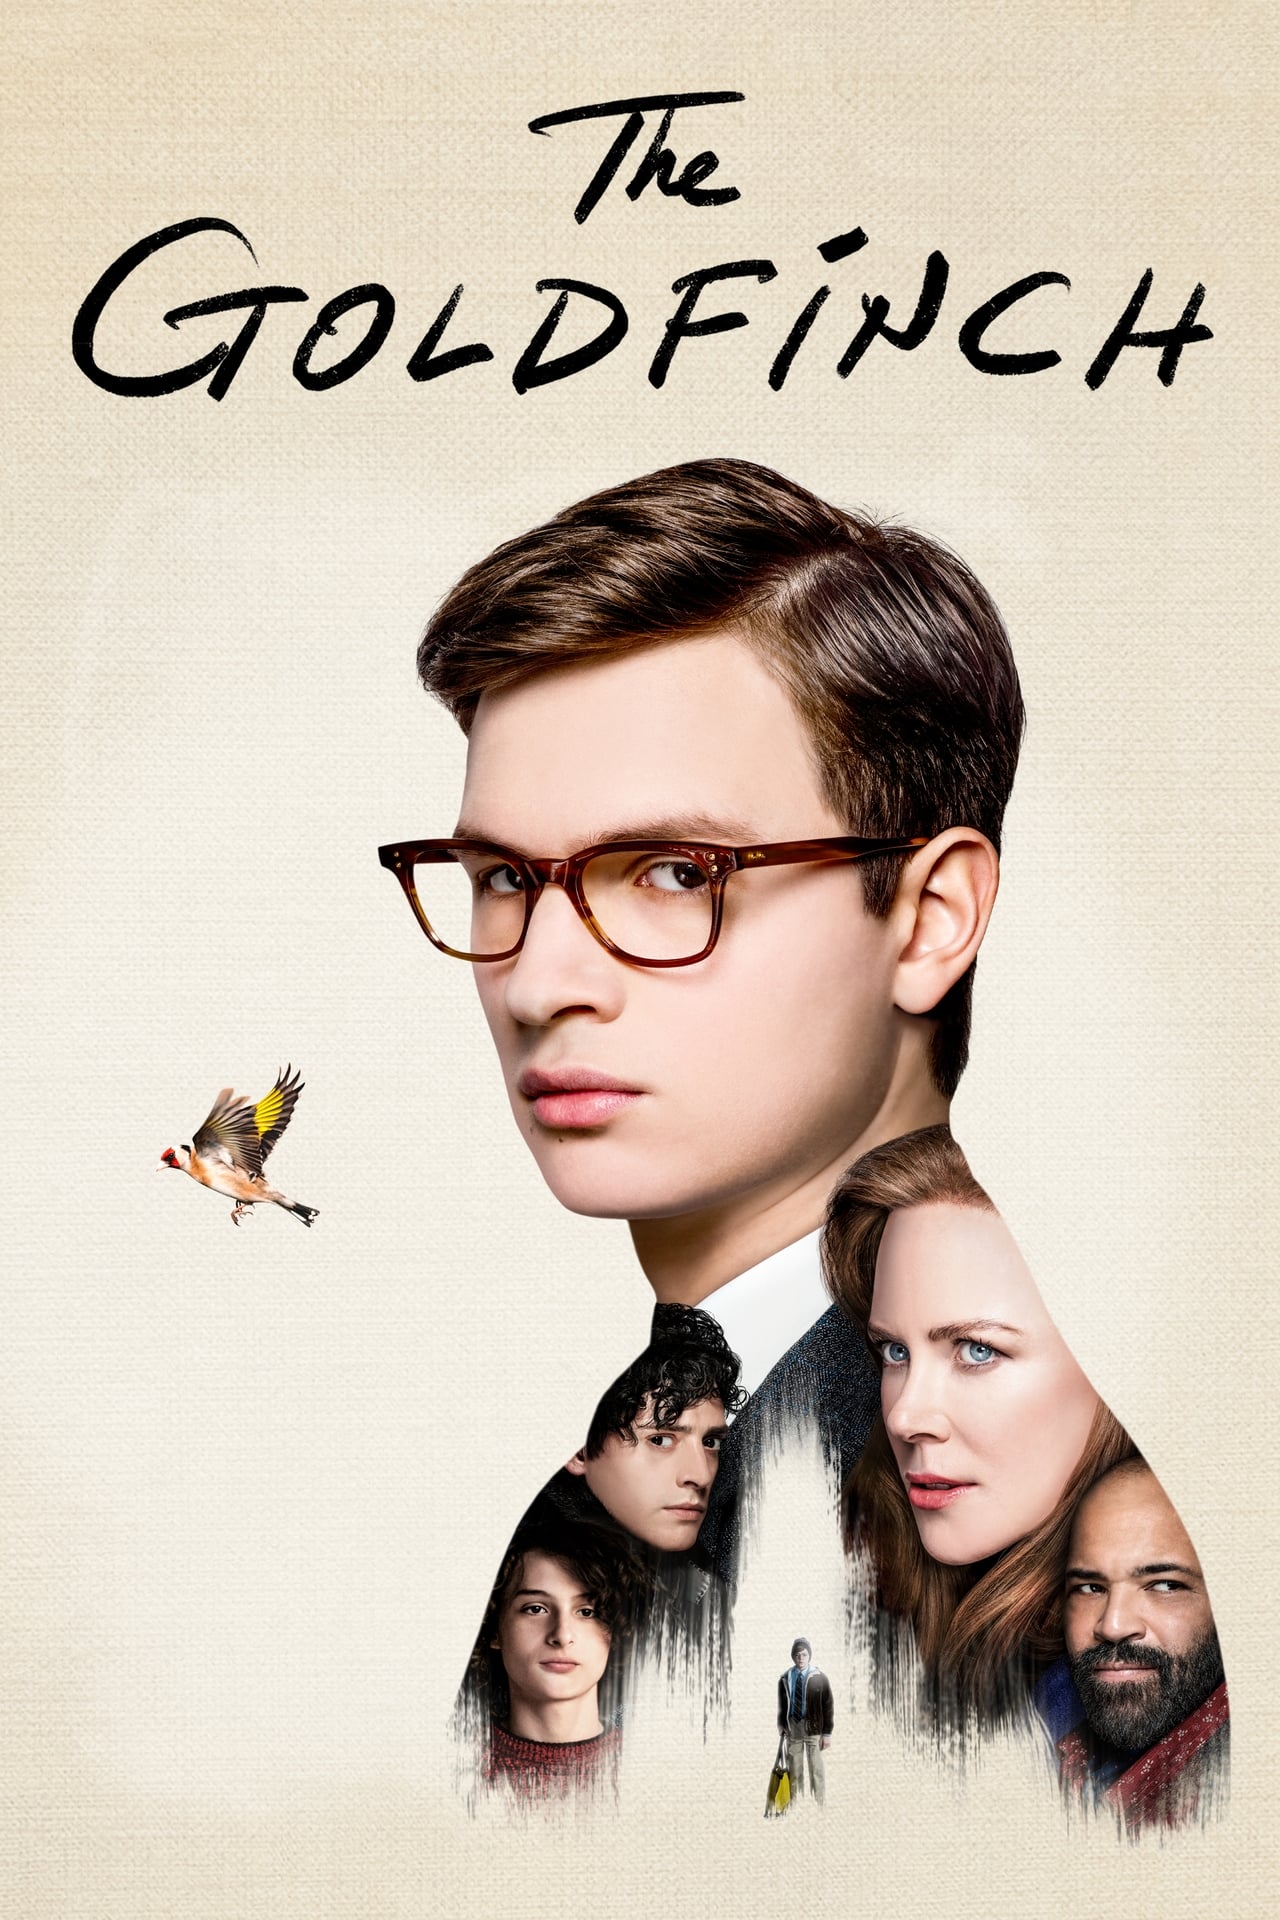 the goldfinch book free